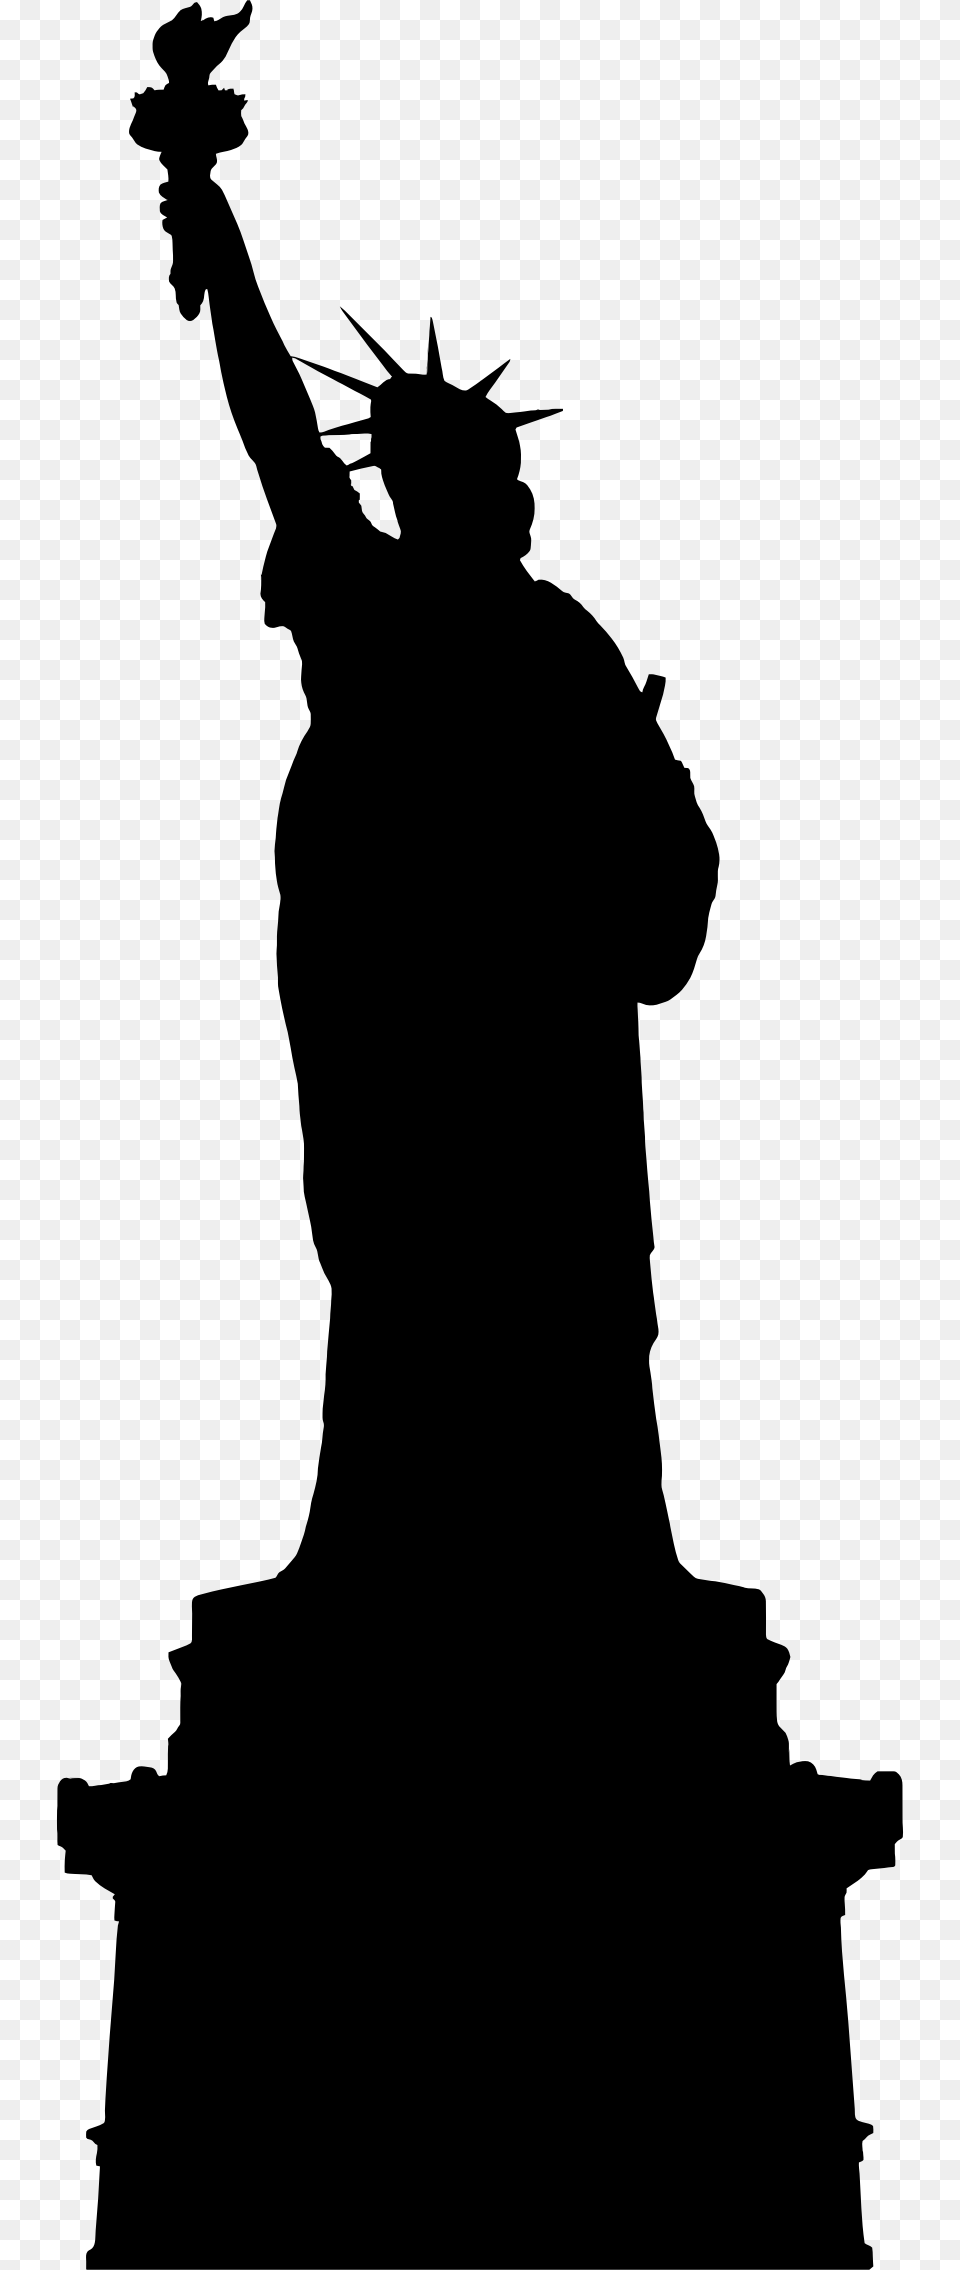 This Free Icons Design Of Statue Of Liberty Silhouette, Gray Png Image